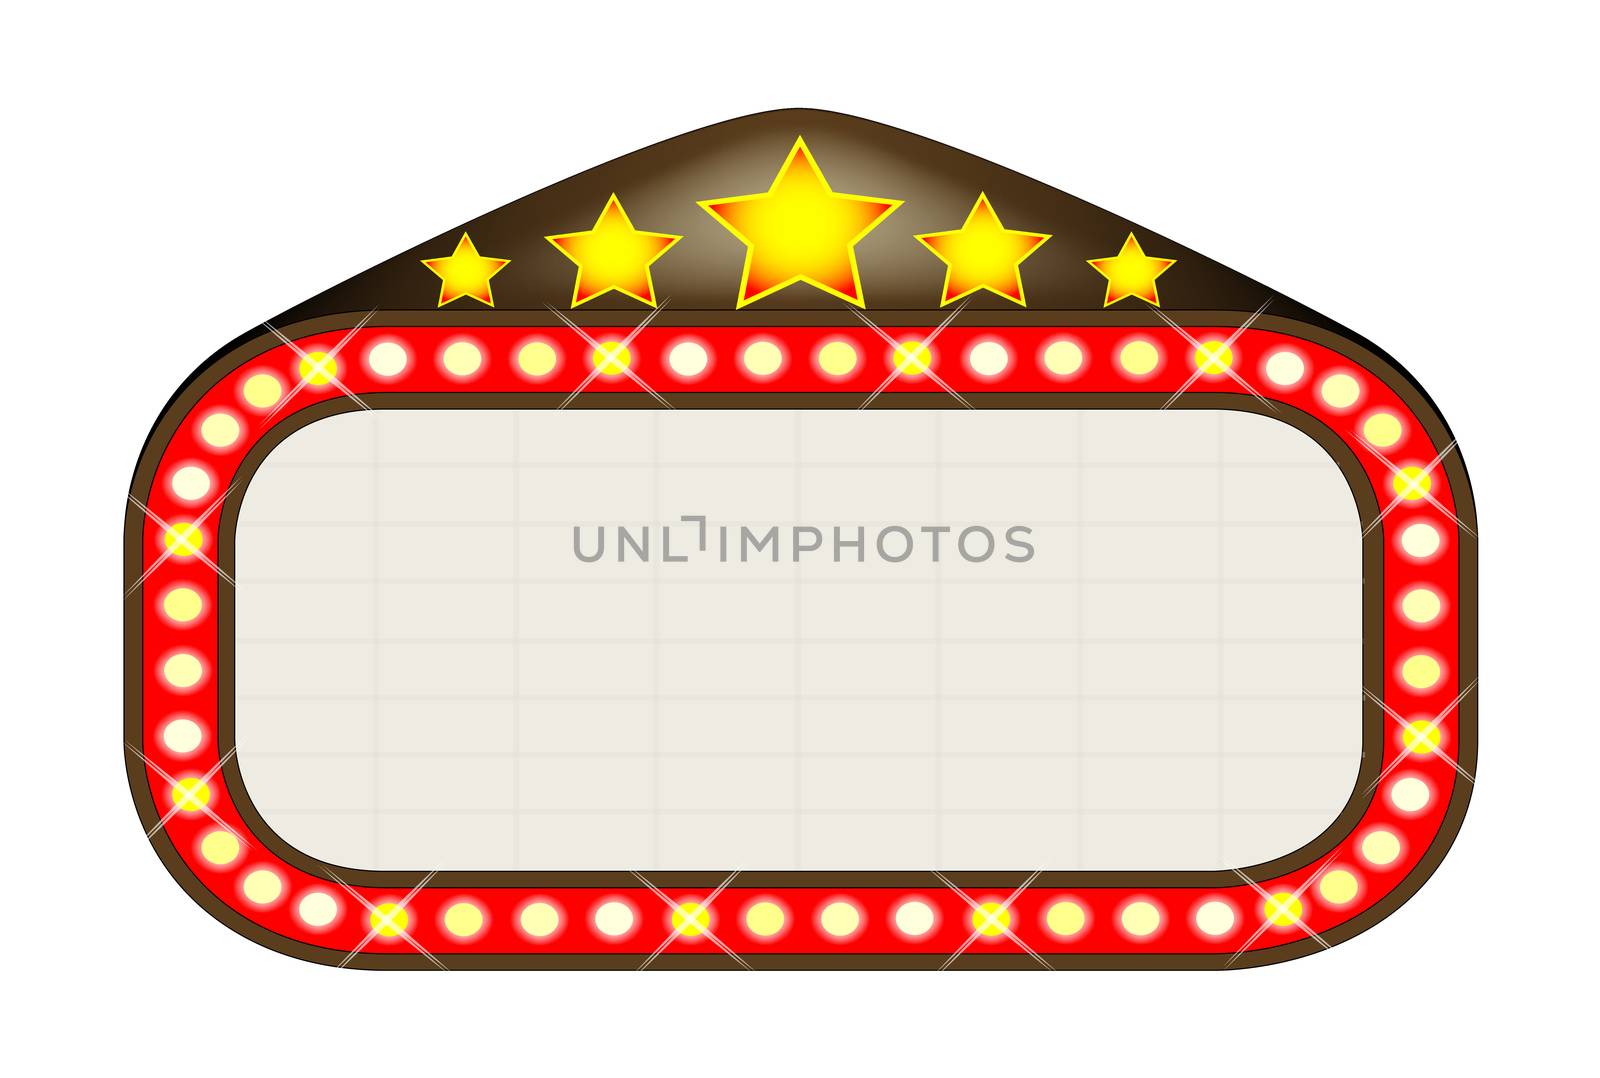 A blank movie theatre or theatre marquee.